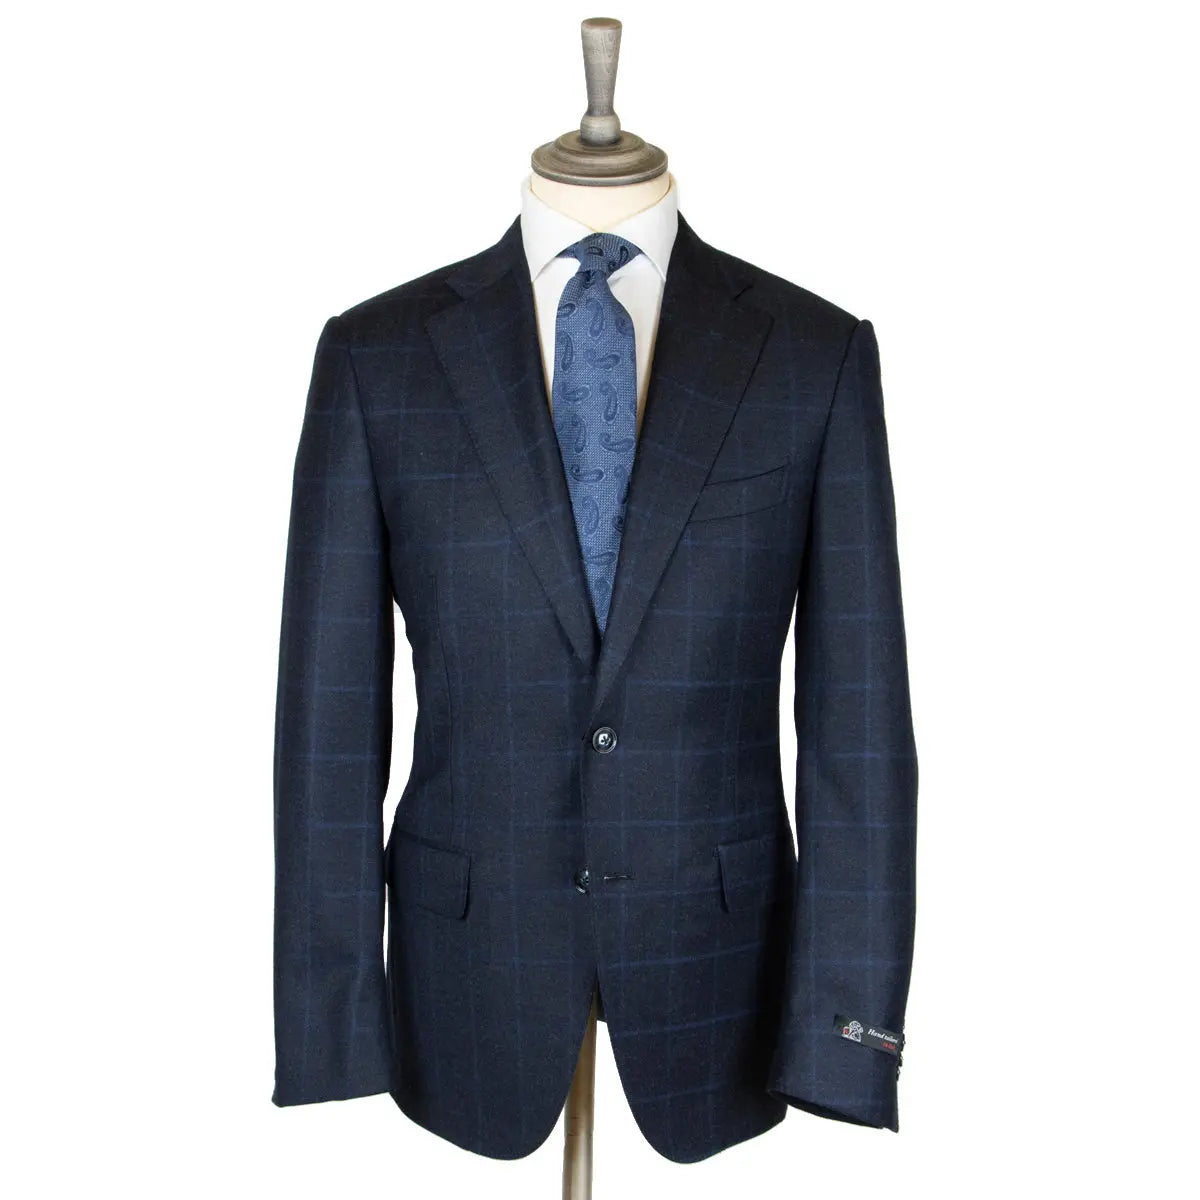 Navy Wool & Cashmere Windowpane Check Suit  Robert Old   